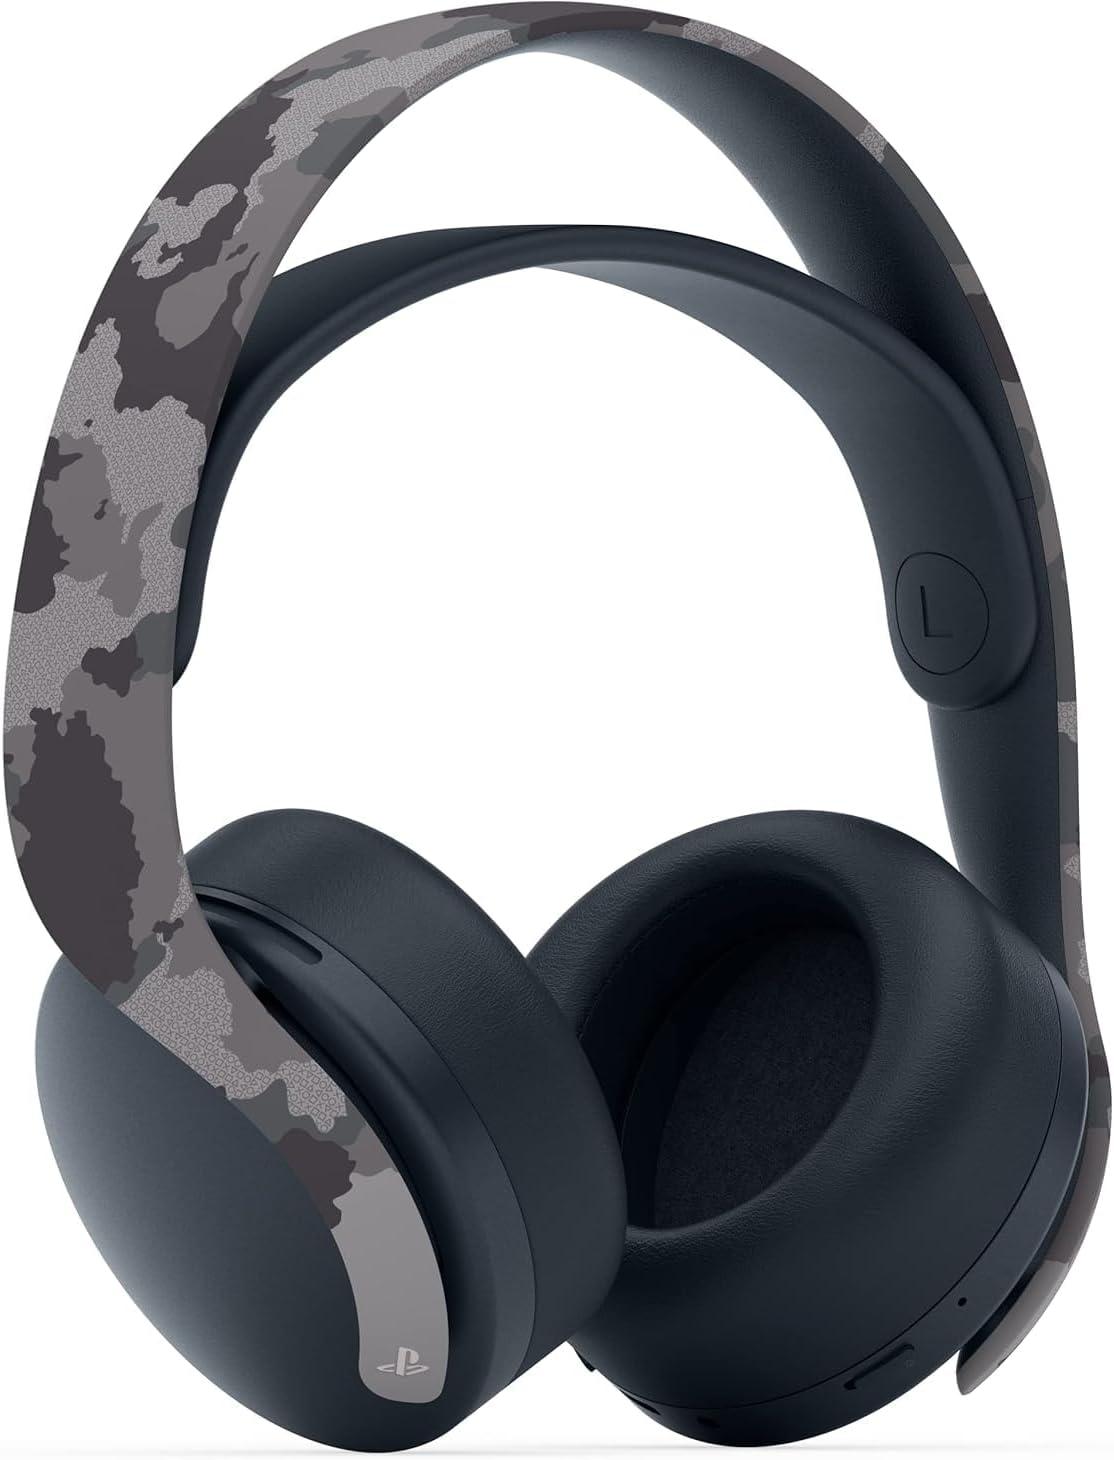 Pulse 3D Wireless Headset - Grey - PlayStation 5 - Want a New Gadget